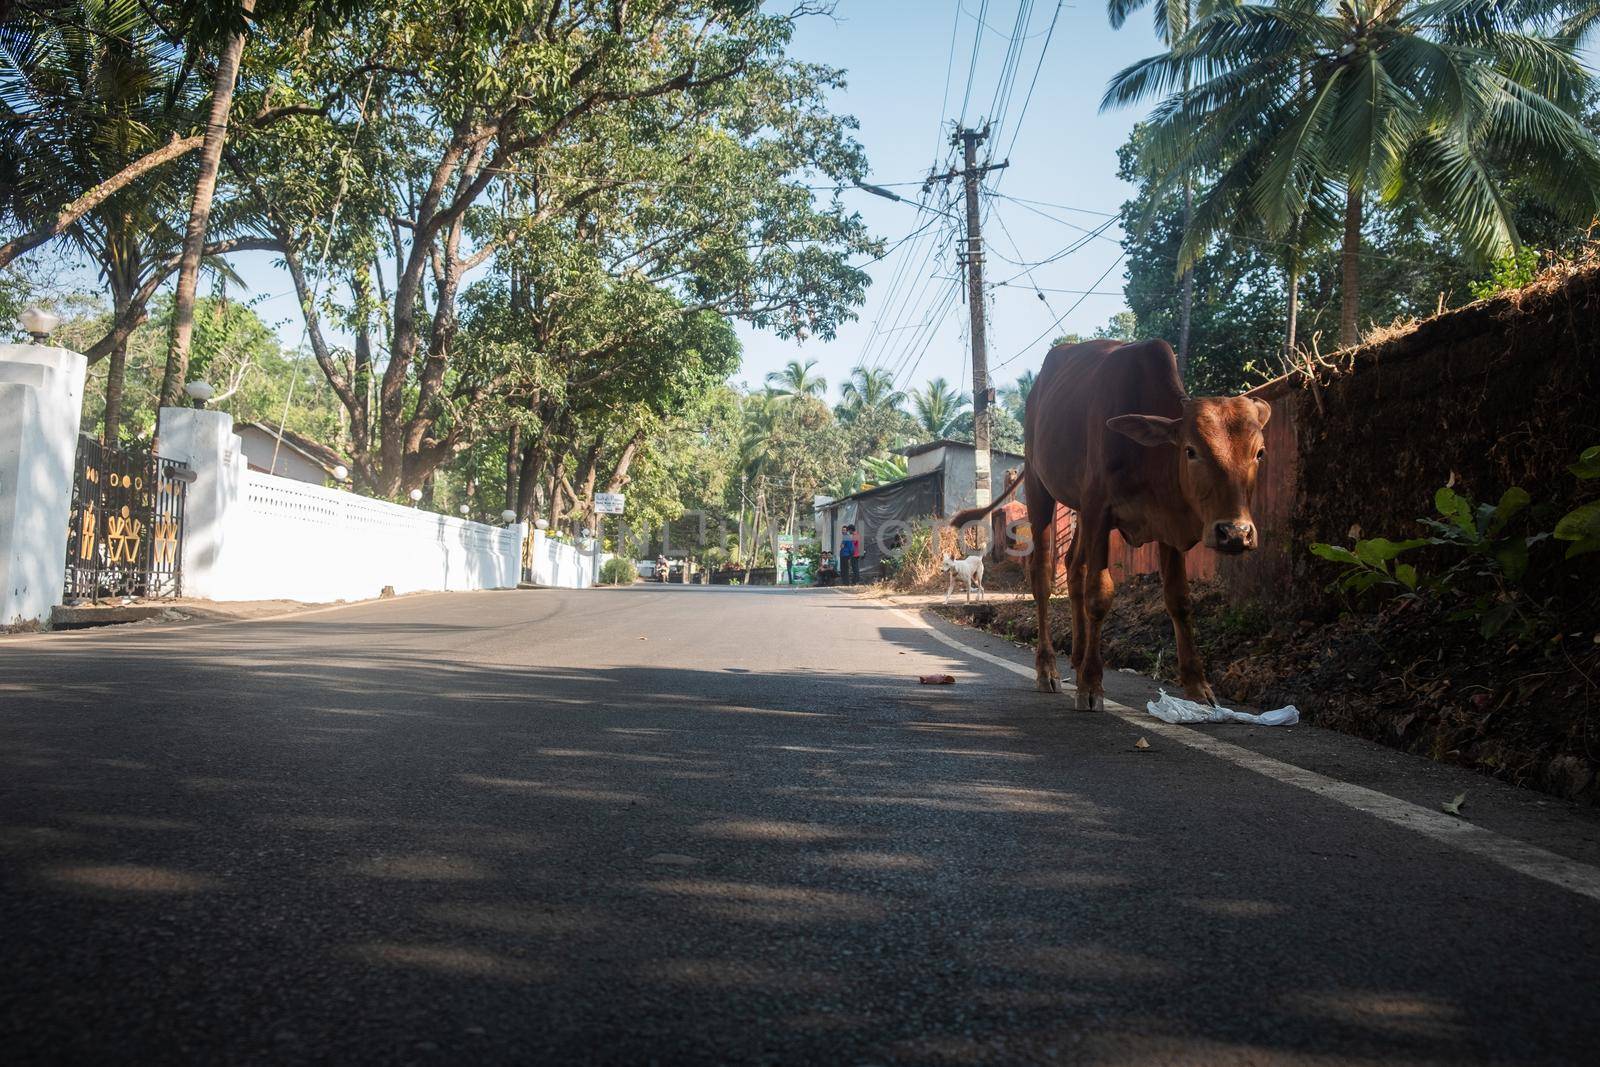 Cow Walking On Road by snep_photo